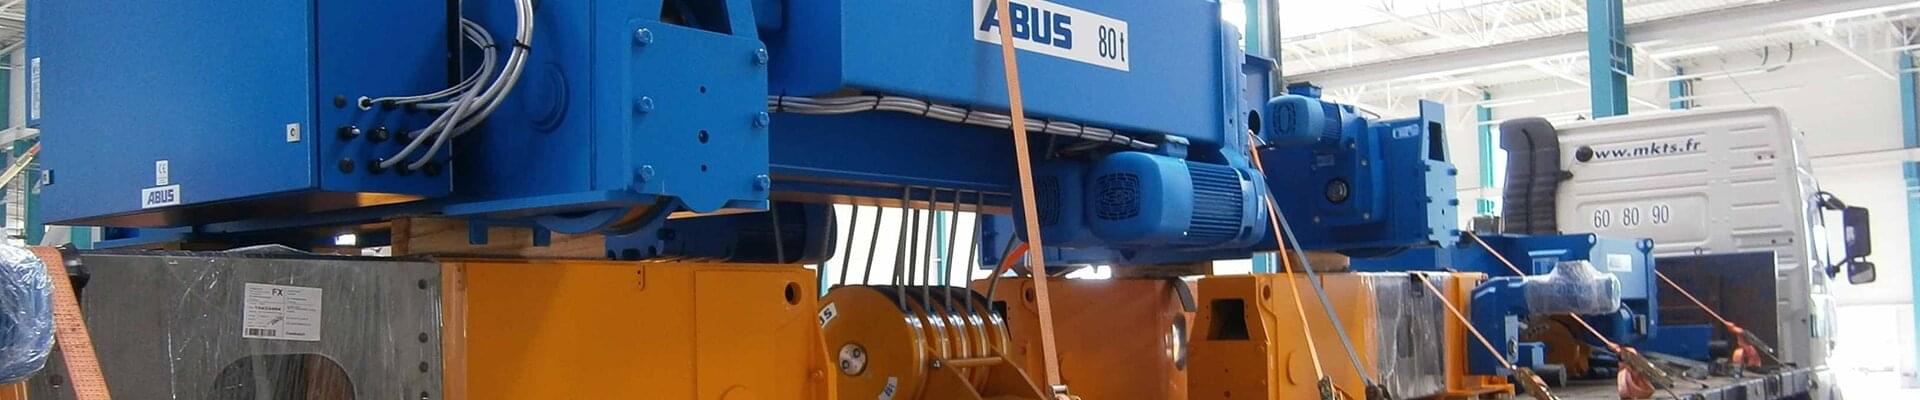 ABUS double girder overhead travelling crane with load capacity of 80 t in a wind turbine manufacturer in France